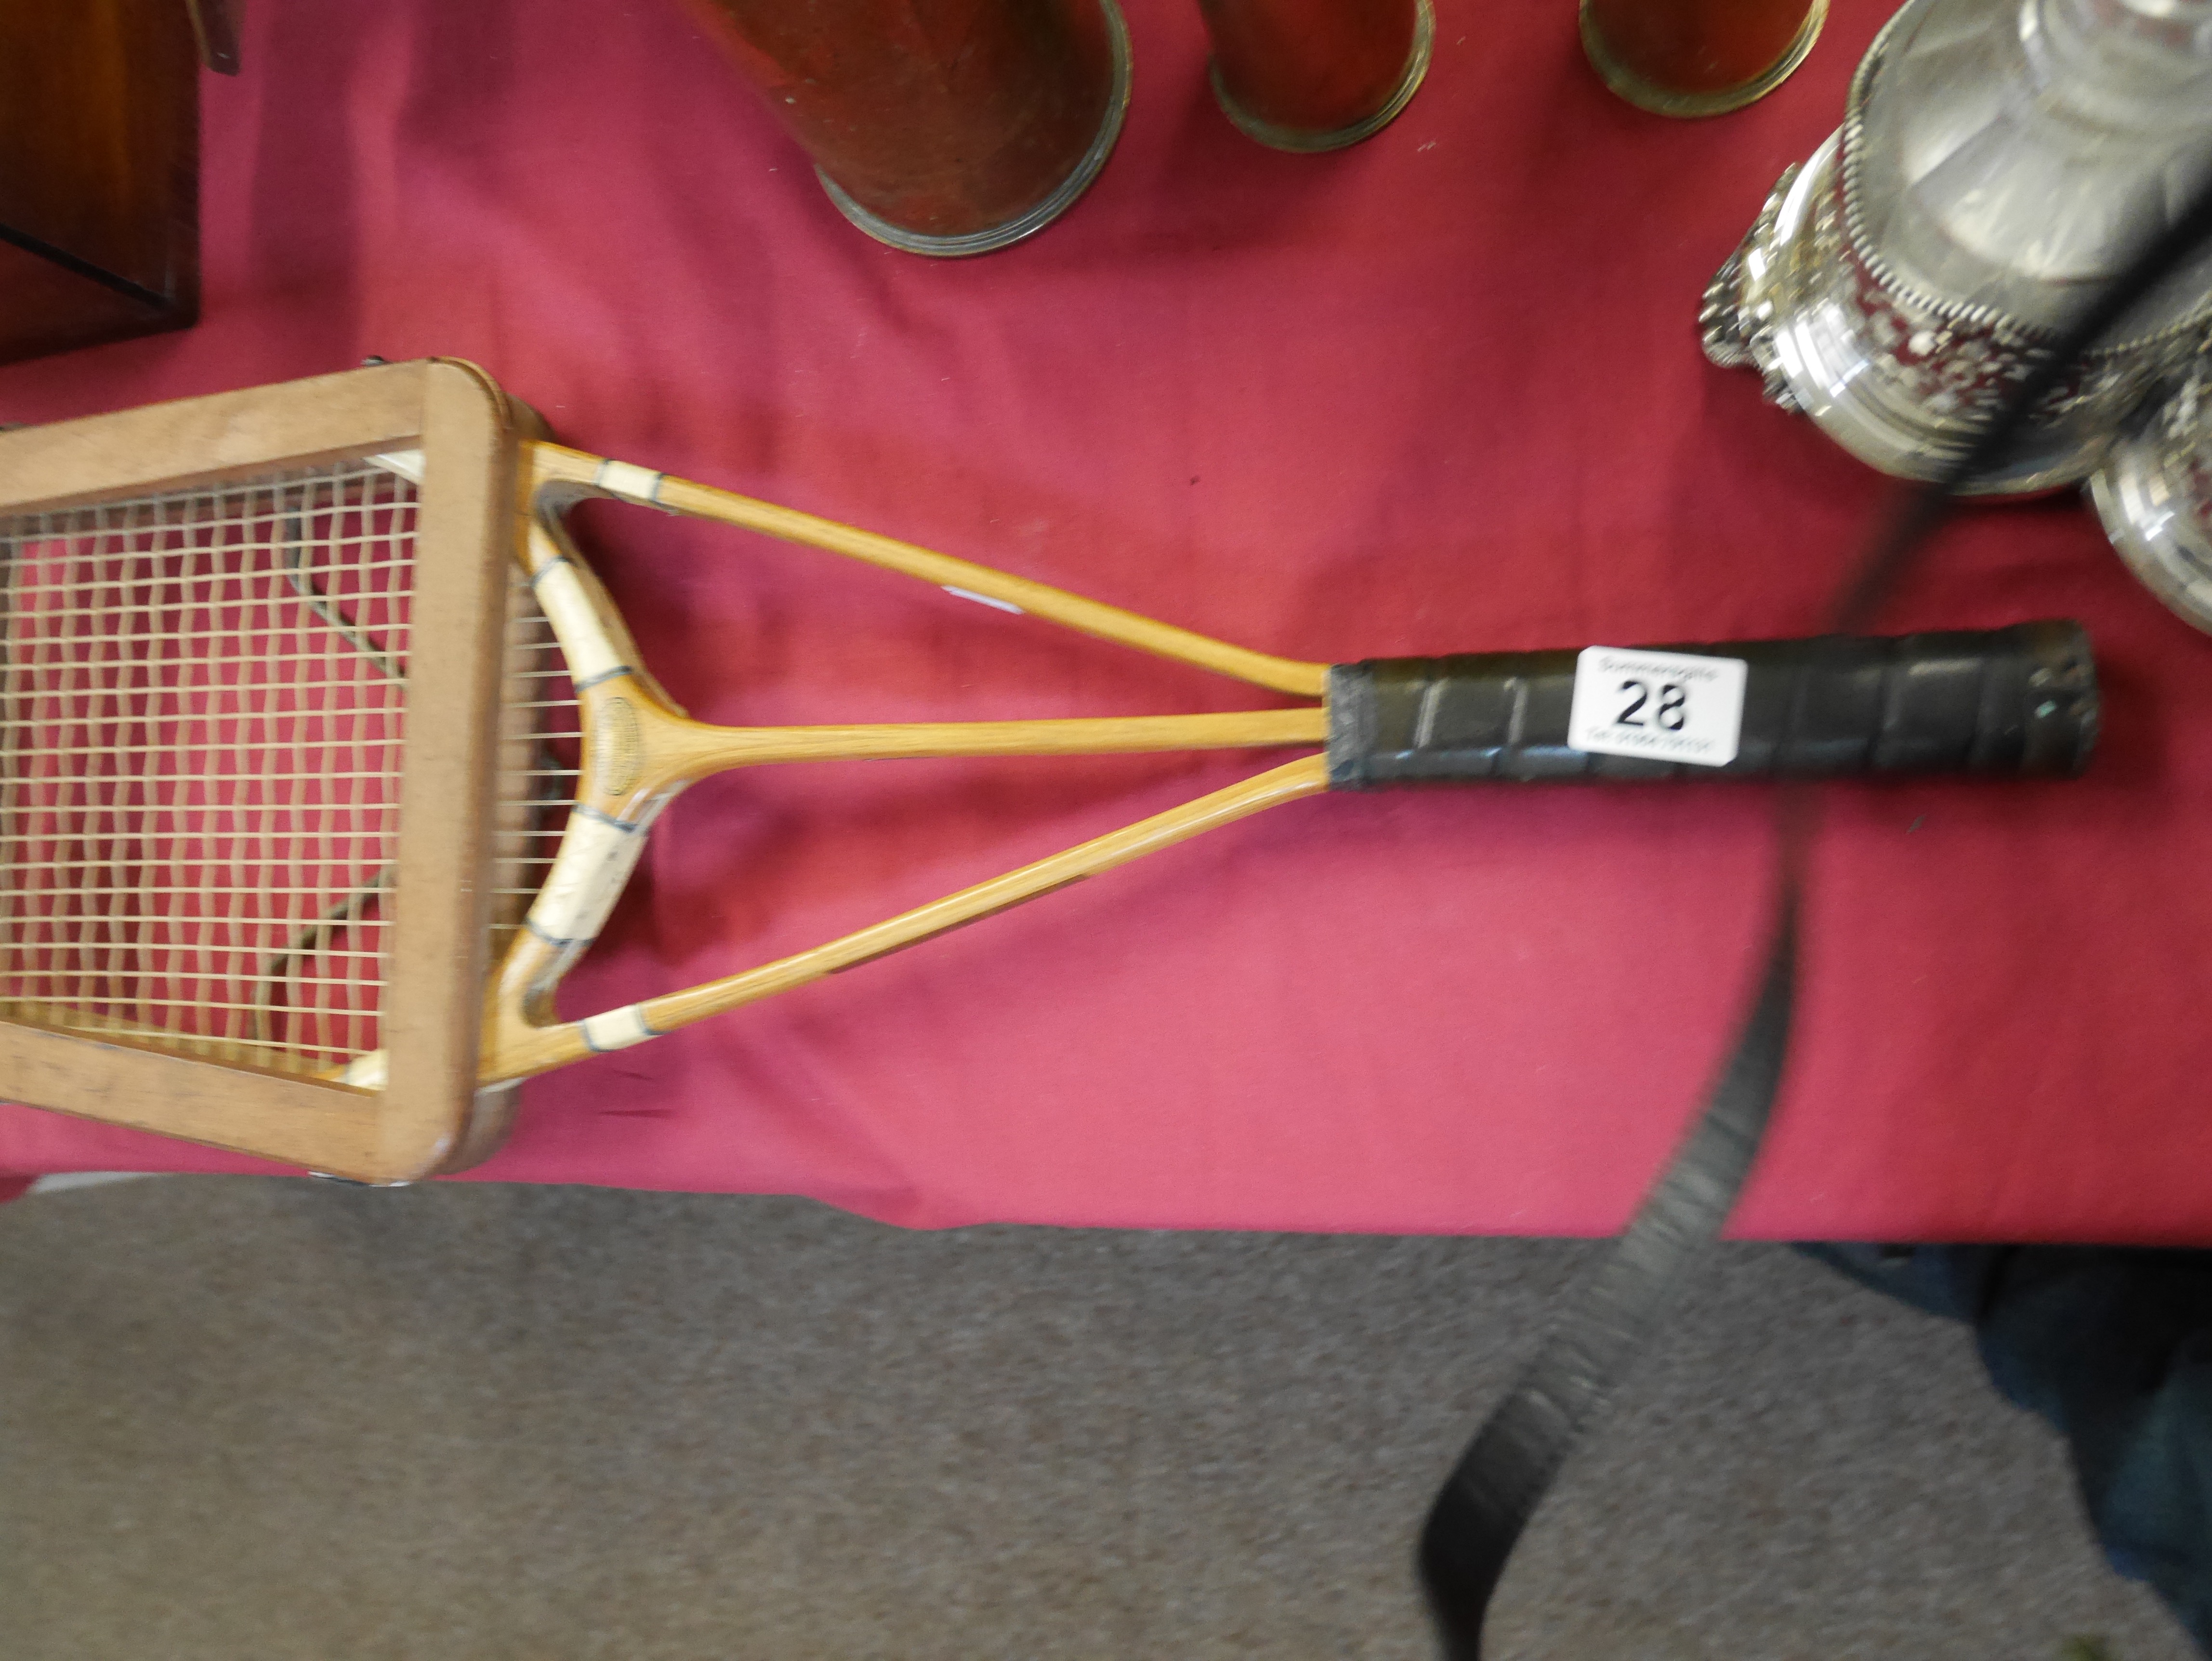 Tennis racket by Finnigans of London & Manchester - Image 2 of 2